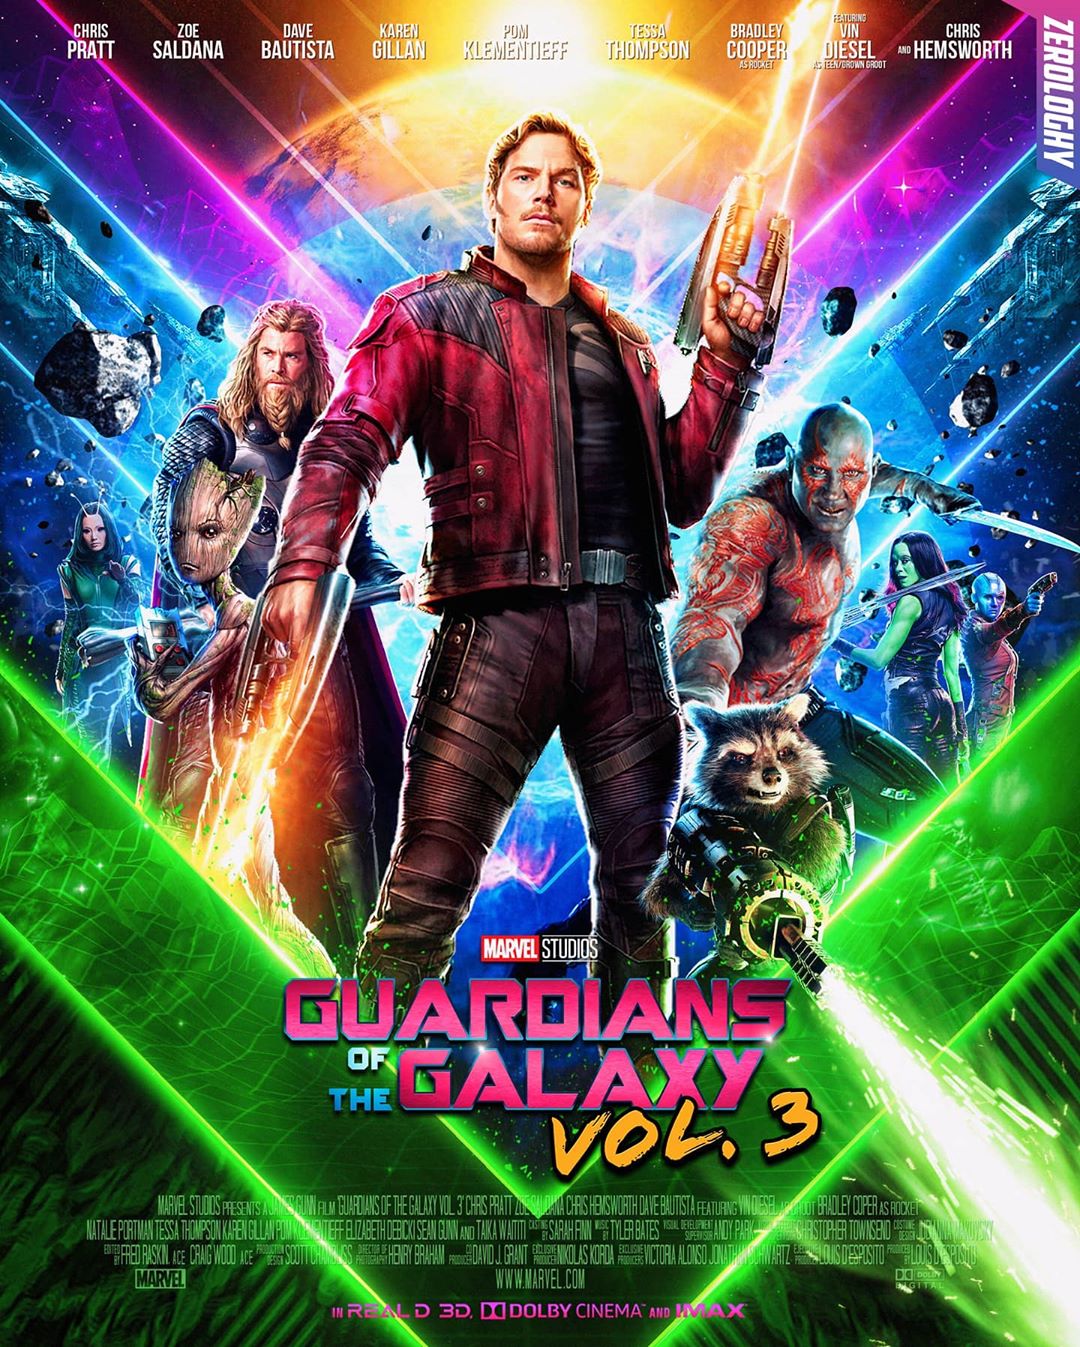 Guardians Of The Galaxy Volume 3 Release Date, Cast and Nebula